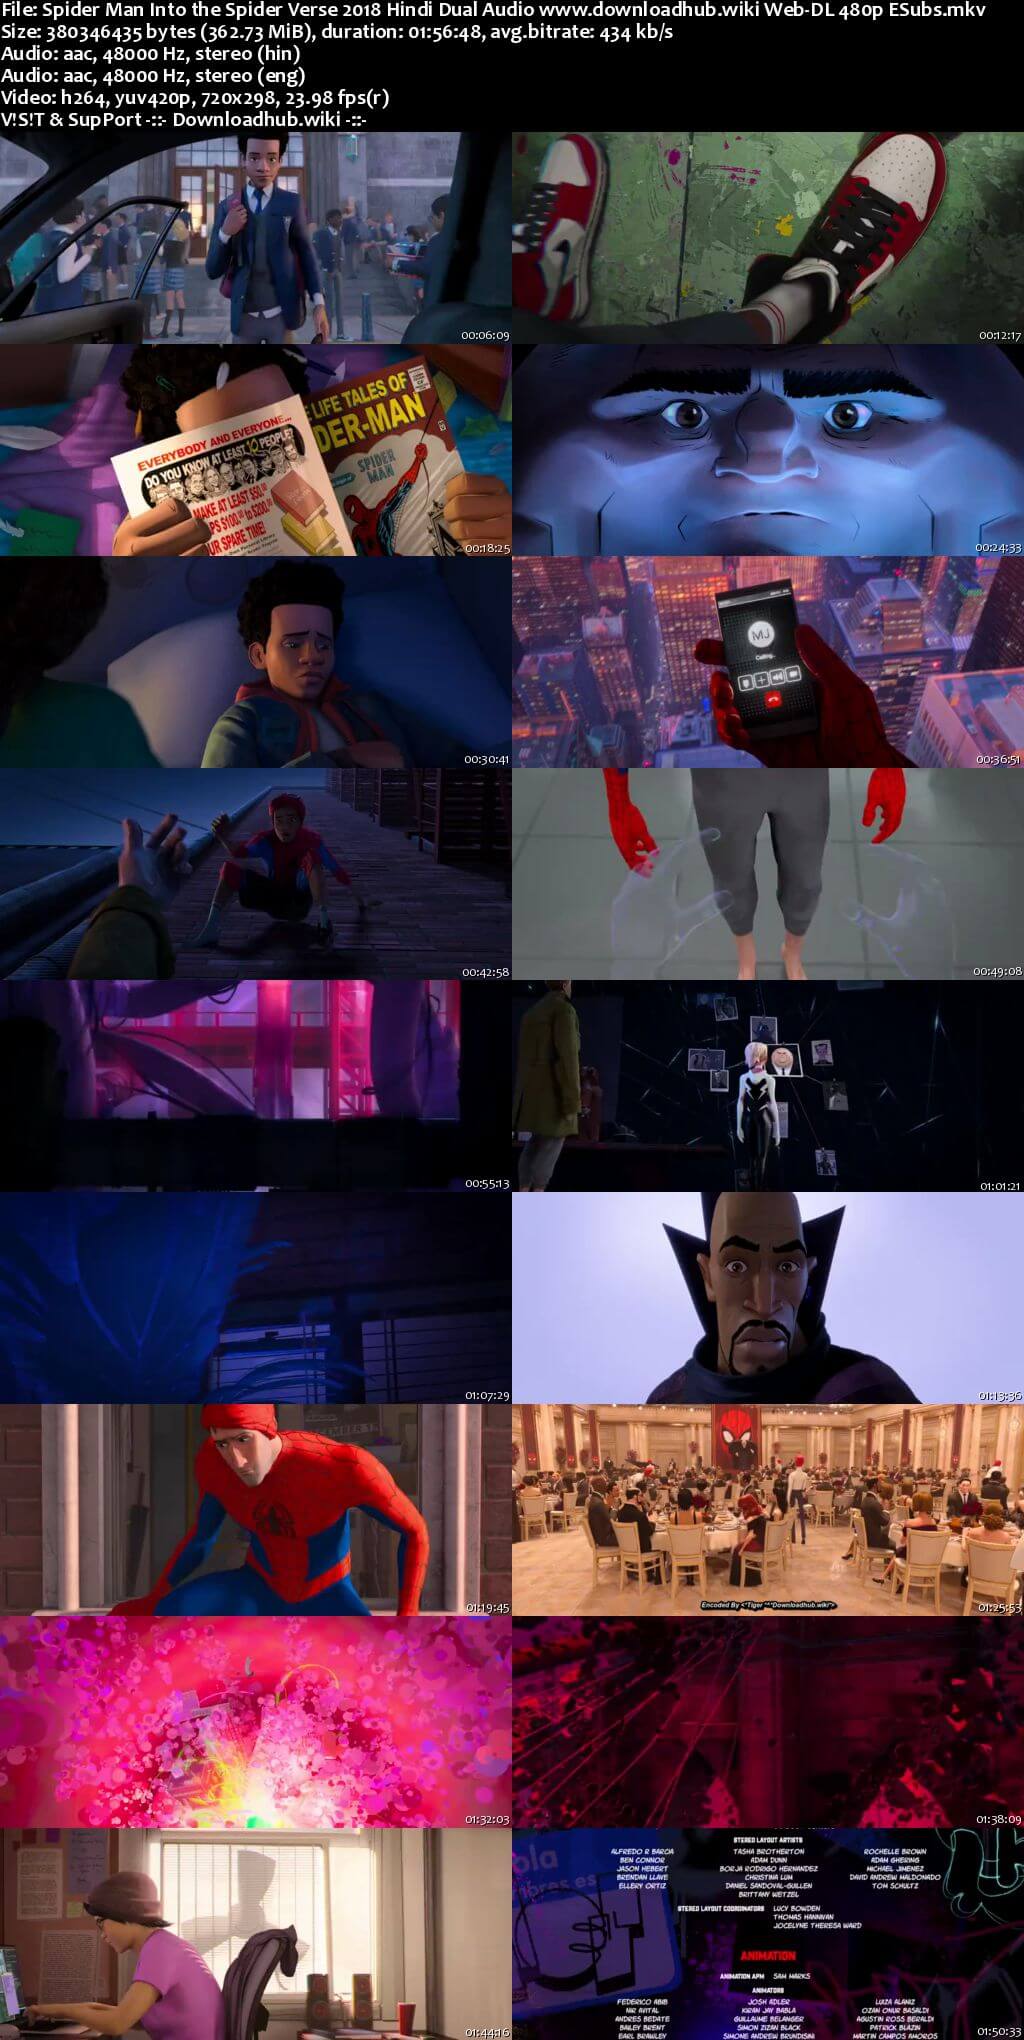 Spider Man Into the Spider Verse 2018 Hindi Dual Audio 350MB Web-DL 480p ESubs